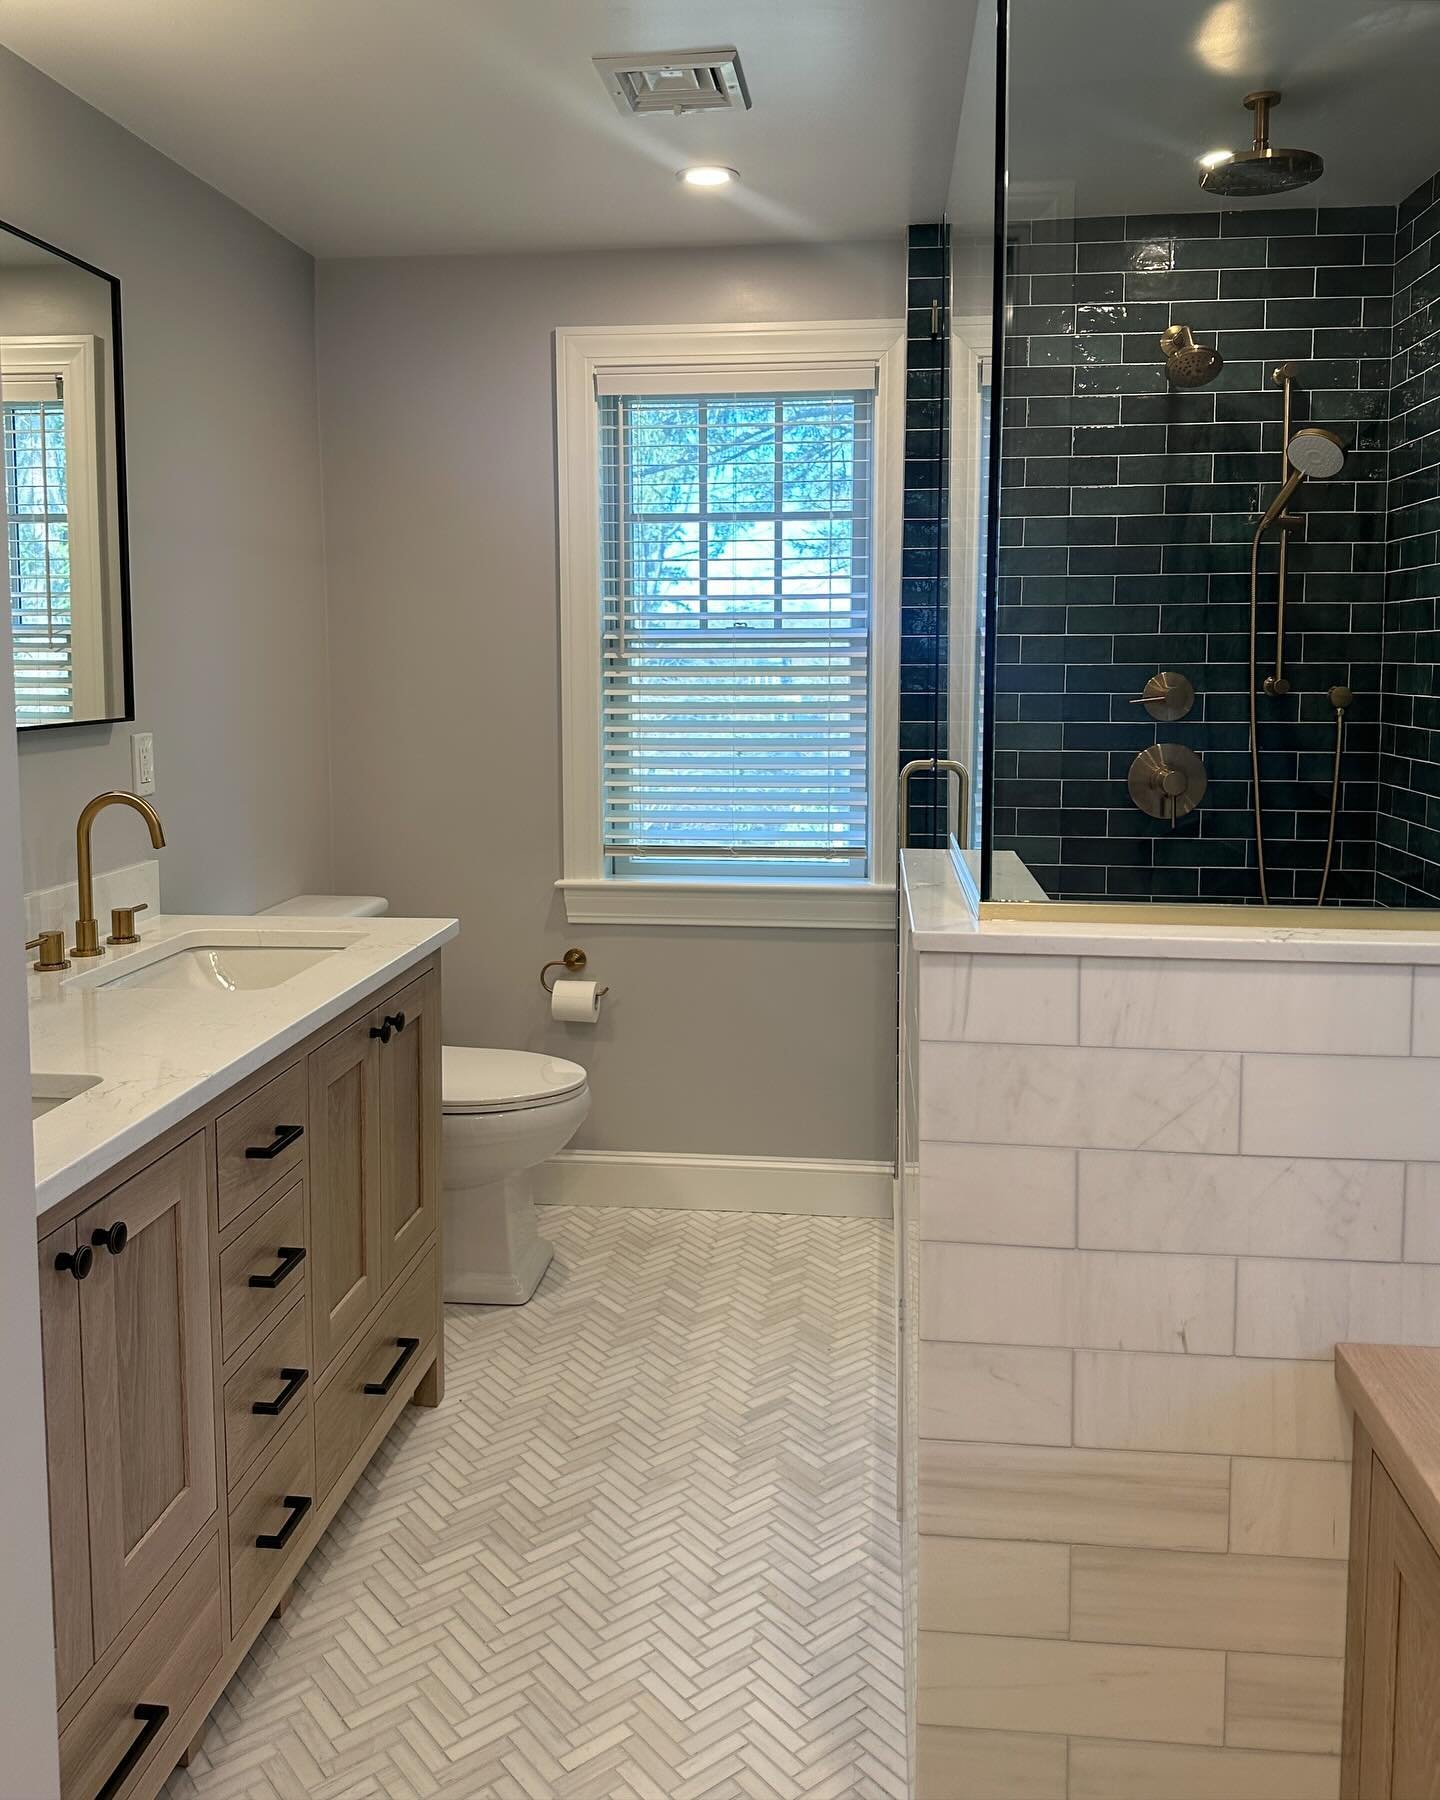 This primary bathroom renovation looks beautiful! We love the finishes Laura and our client selected, especially the green tile from @bedrosianstile. It coordinates so well with the marble herringbone tile and the oil-rubbed bronze fixtures. The whit